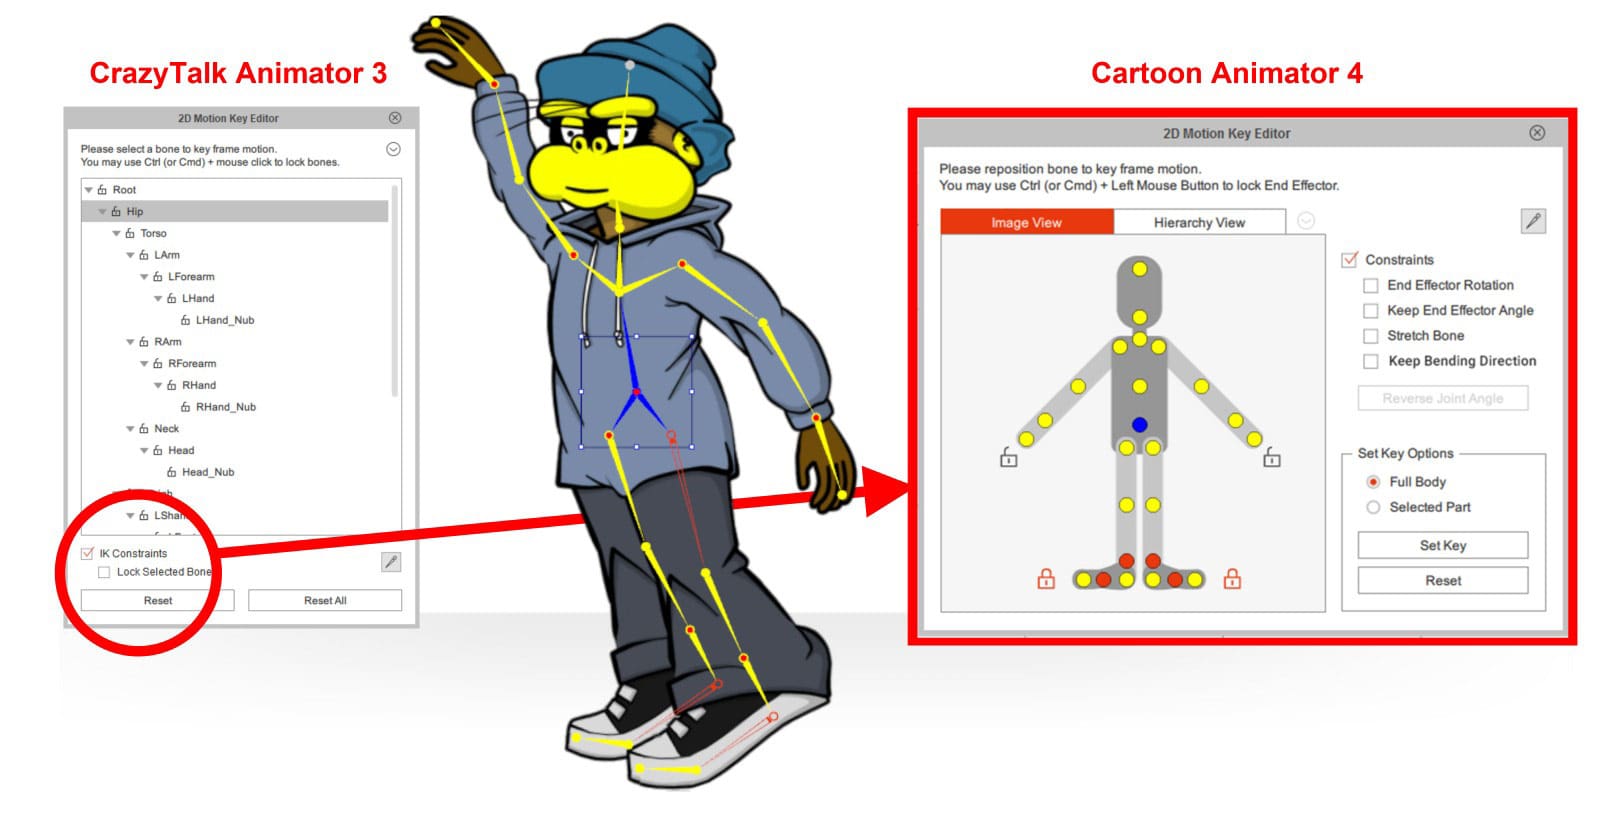 Cartoon Animator 4: What To Expect In The Upcoming Release